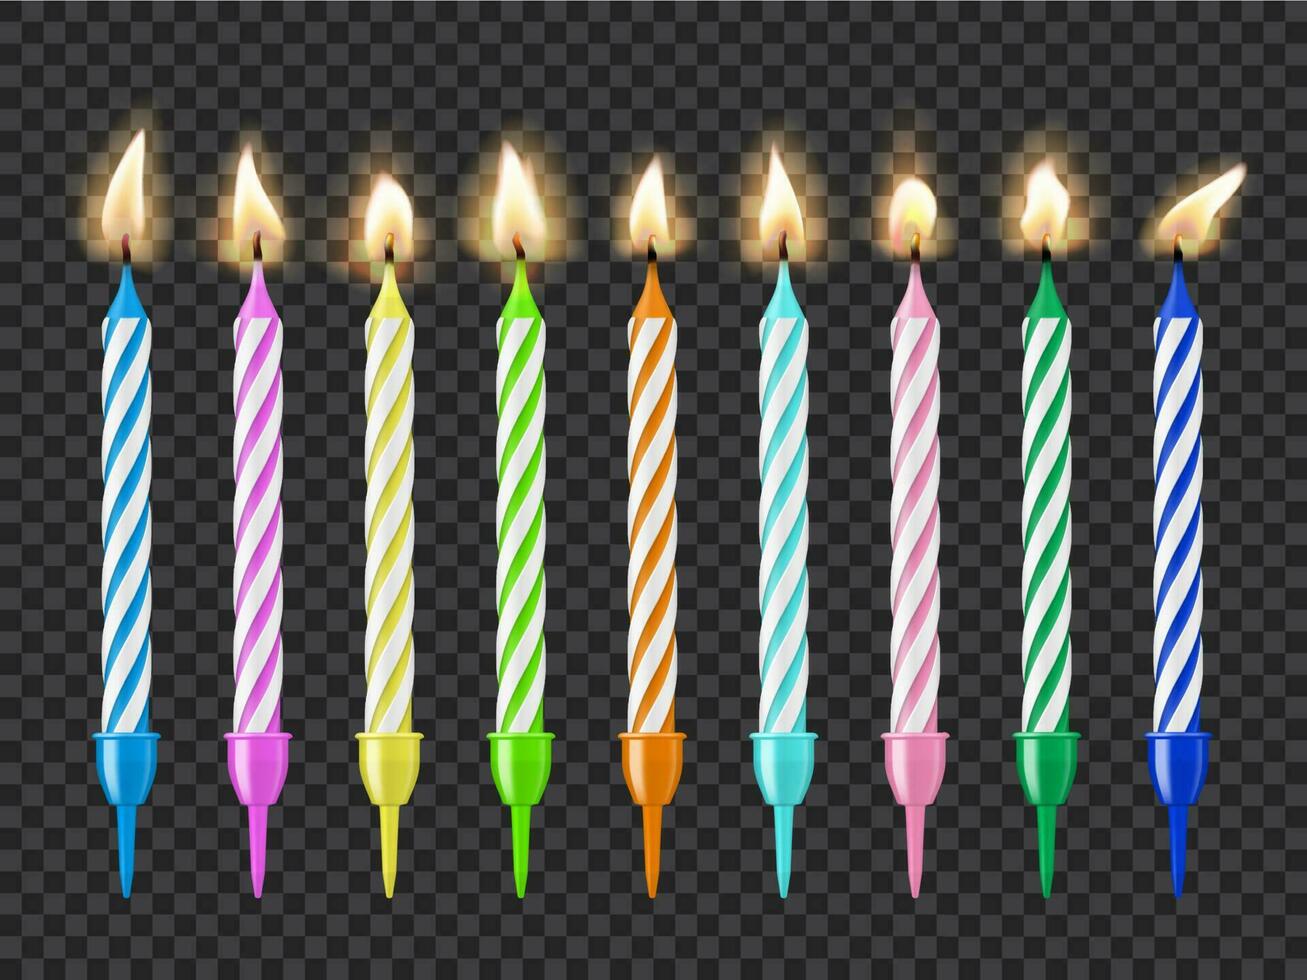 Birthday cake candles, candlelight fire flame set vector